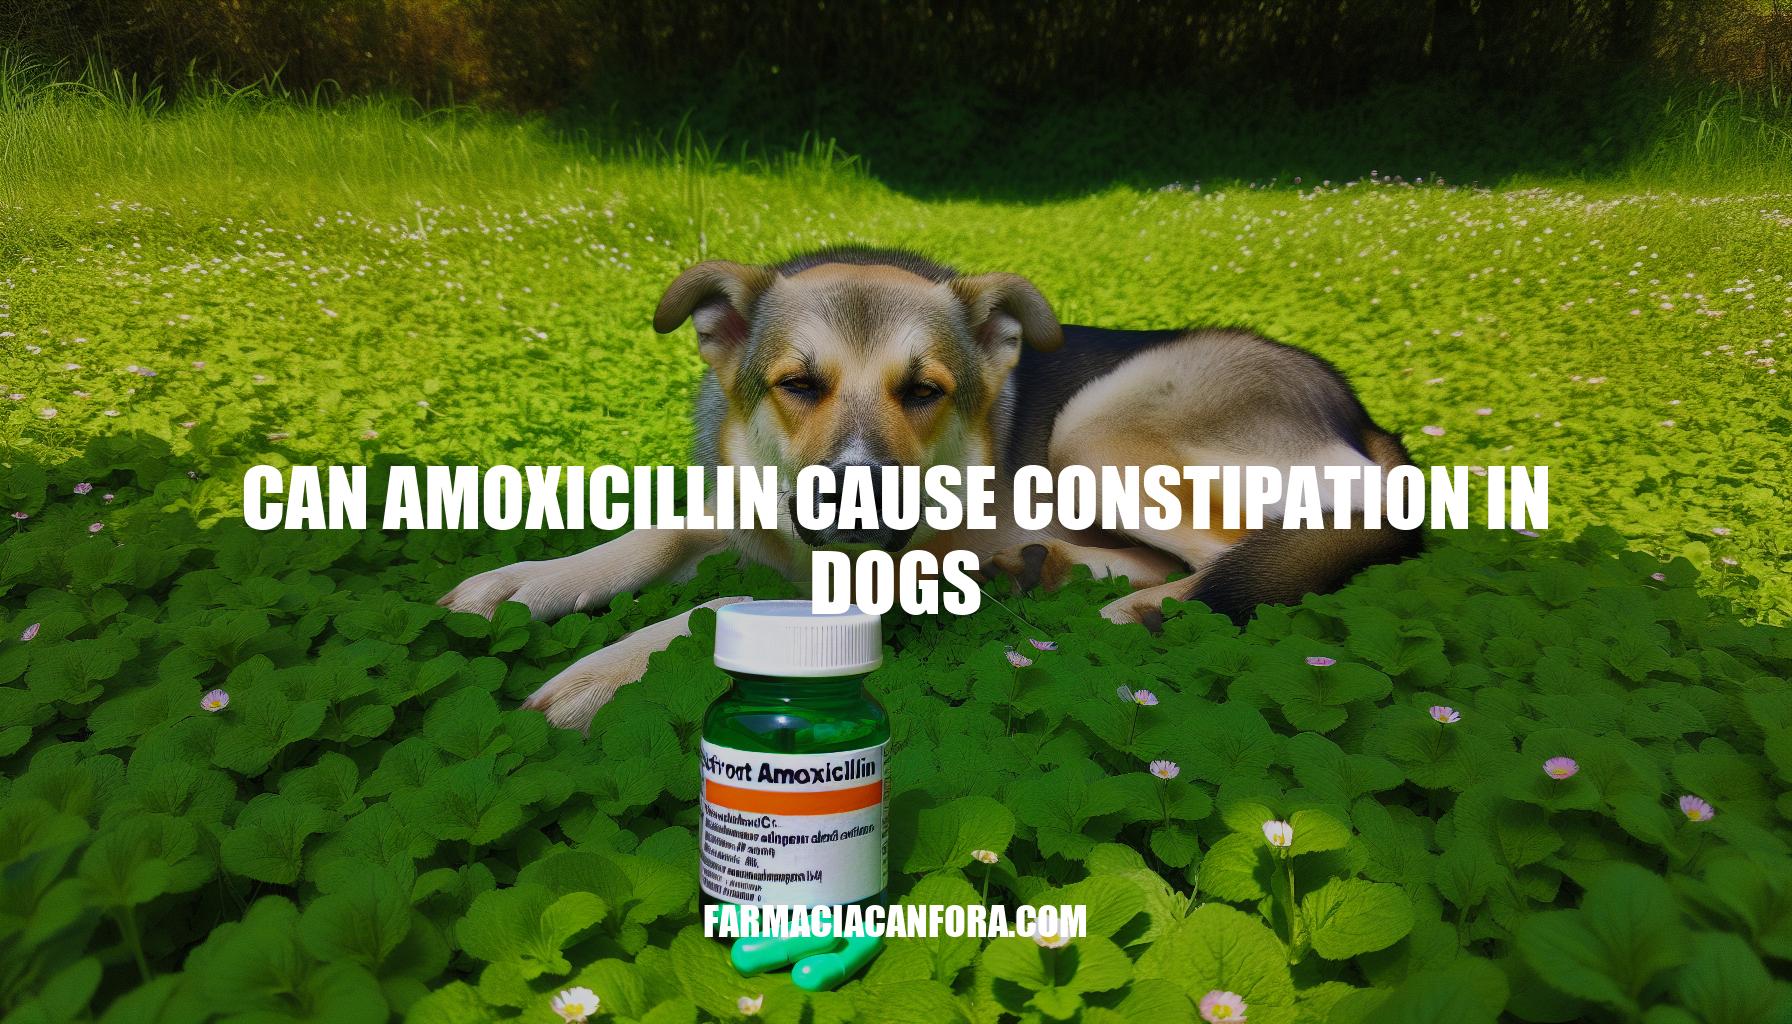 Can Amoxicillin Cause Constipation in Dogs: Know the Facts